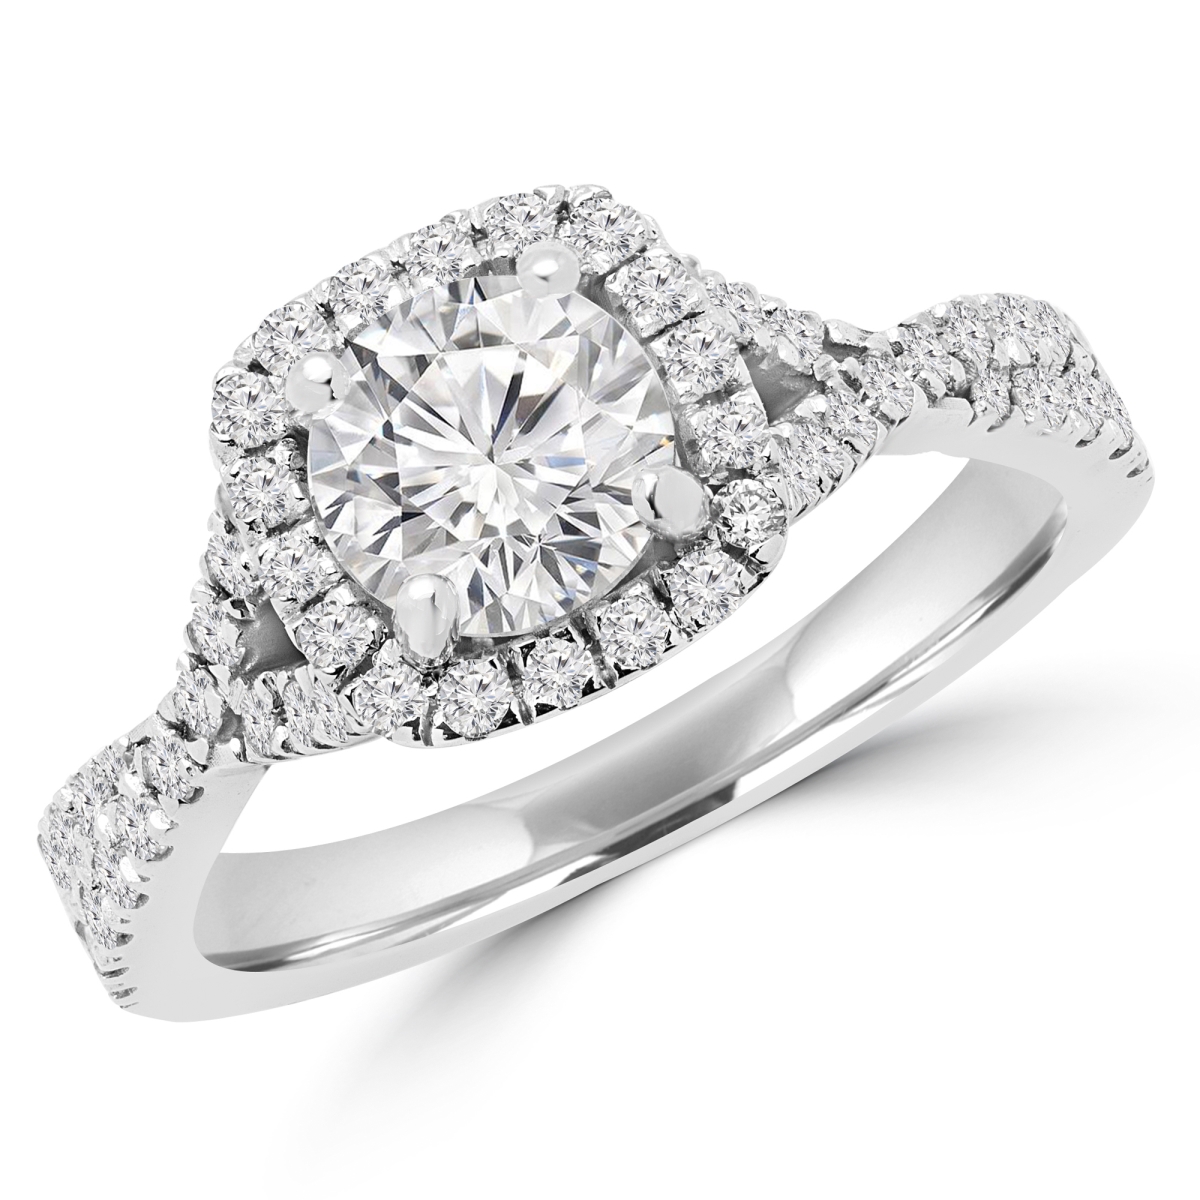 Picture of Majesty Diamonds MD170303-8.5 1.6 CTW Round Diamond Split Shank Halo Engagement Ring in 14K White Gold - Size 8.5